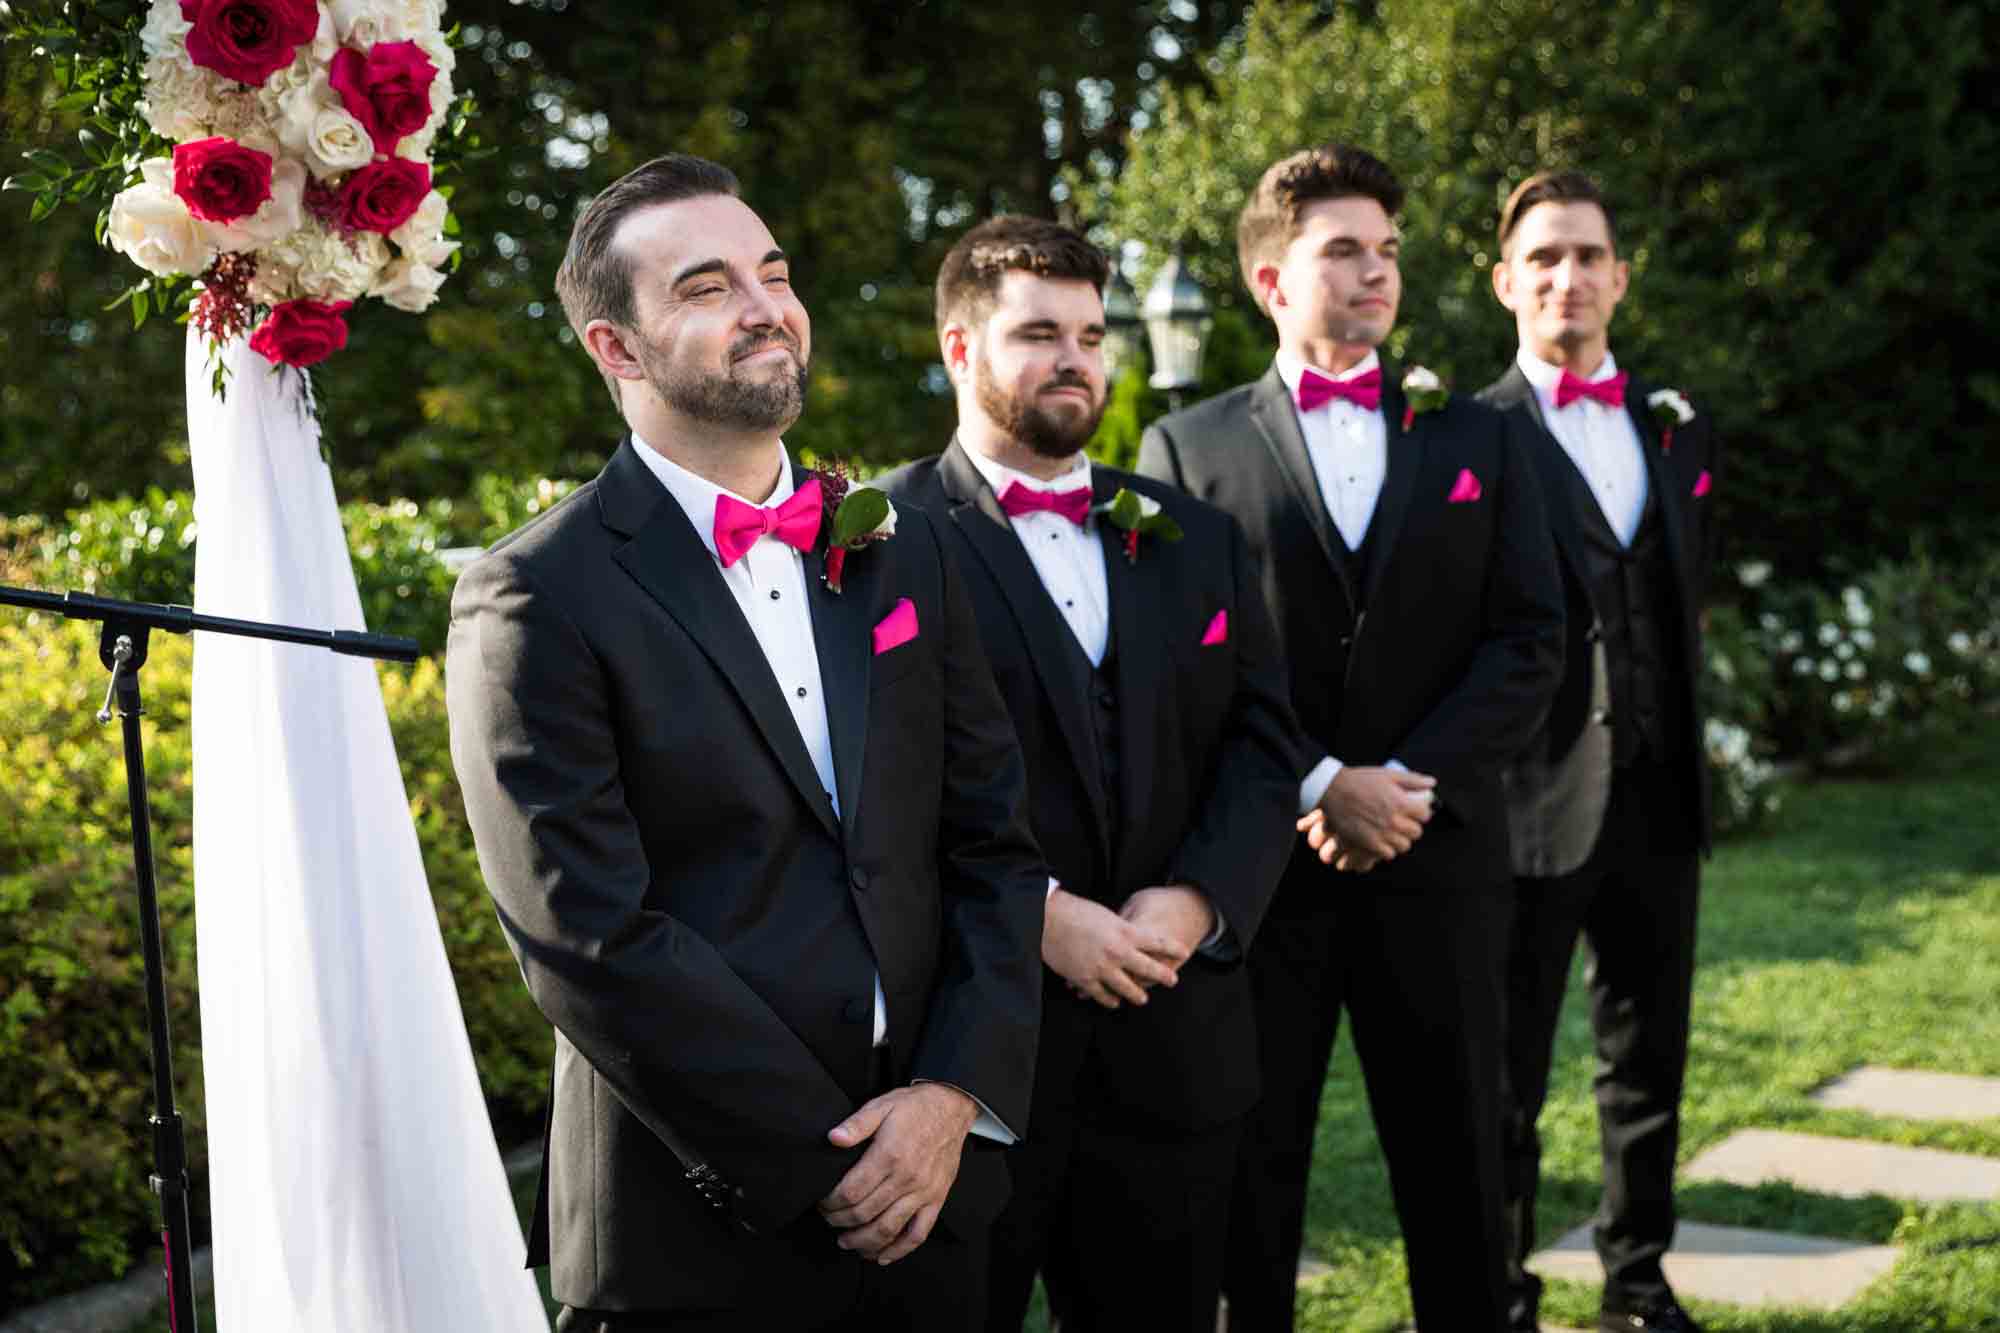 Groom and groomsmen waiting for bride during ceremony at a Briarcliff Manor wedding